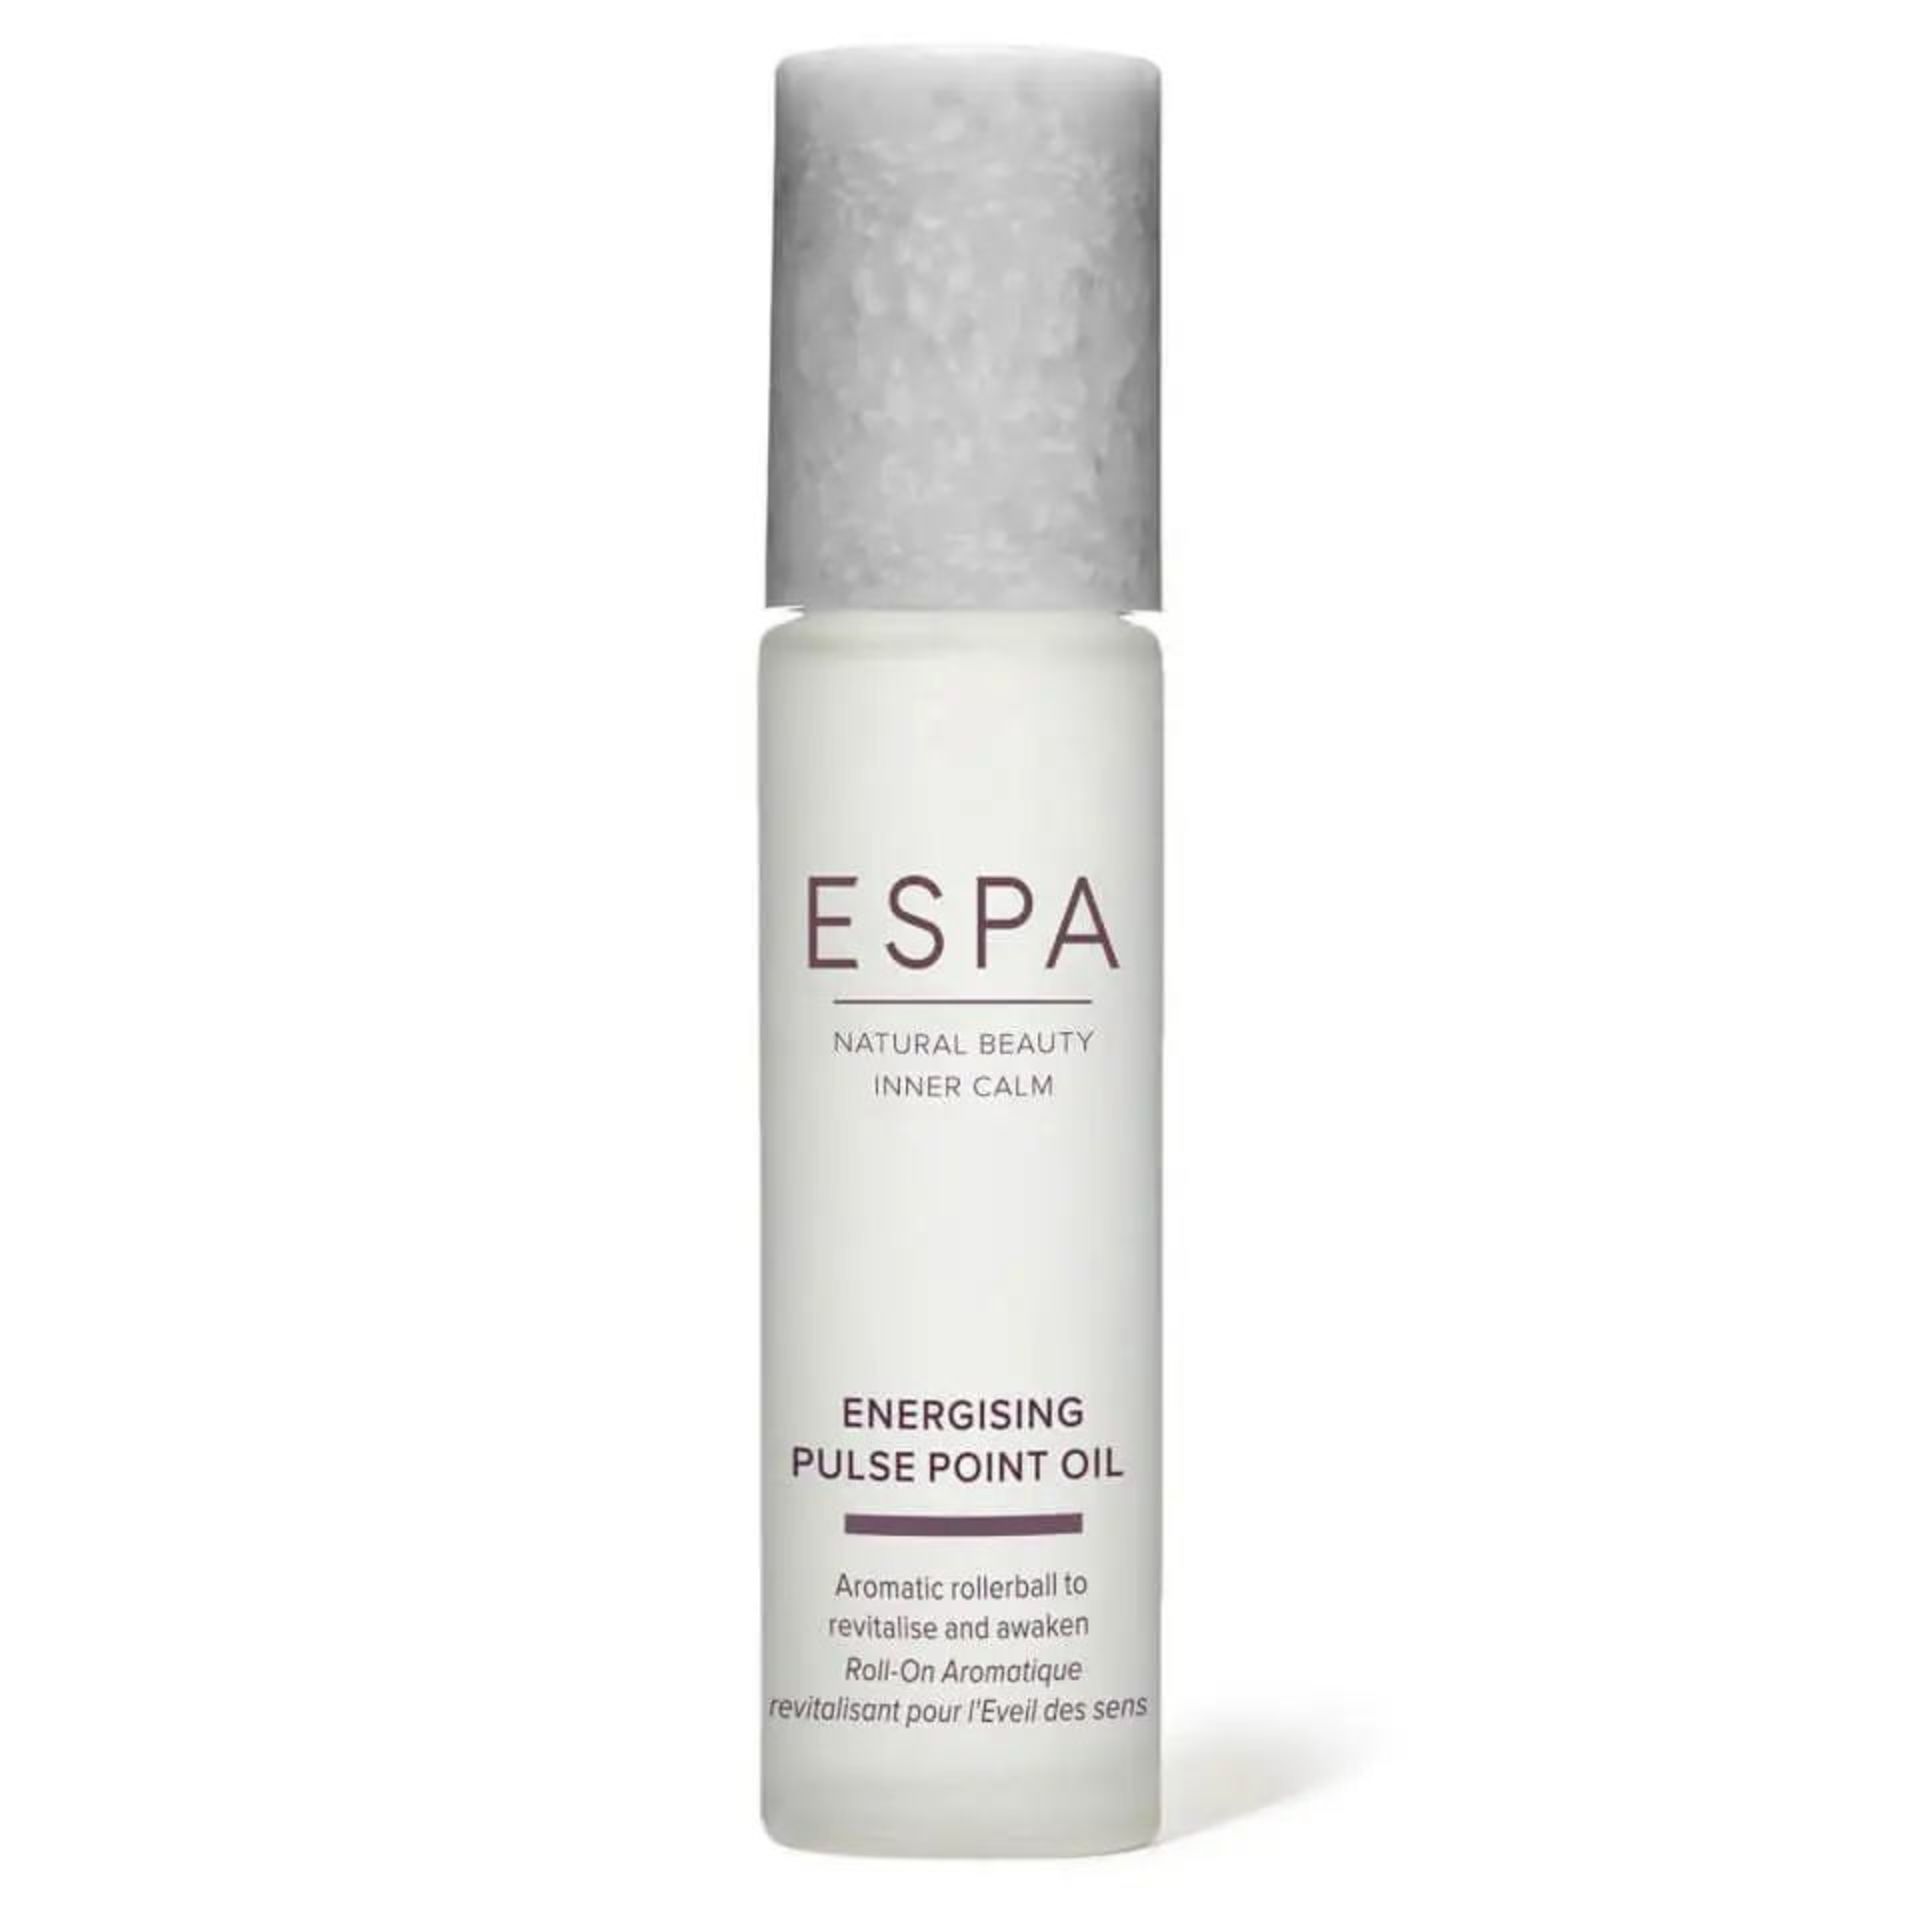 TRADE LOT TO CONTAIN 50x NEW Espa Energising Pulse Point Oil. 9ML. RRP £23 EACH. (OFC). A